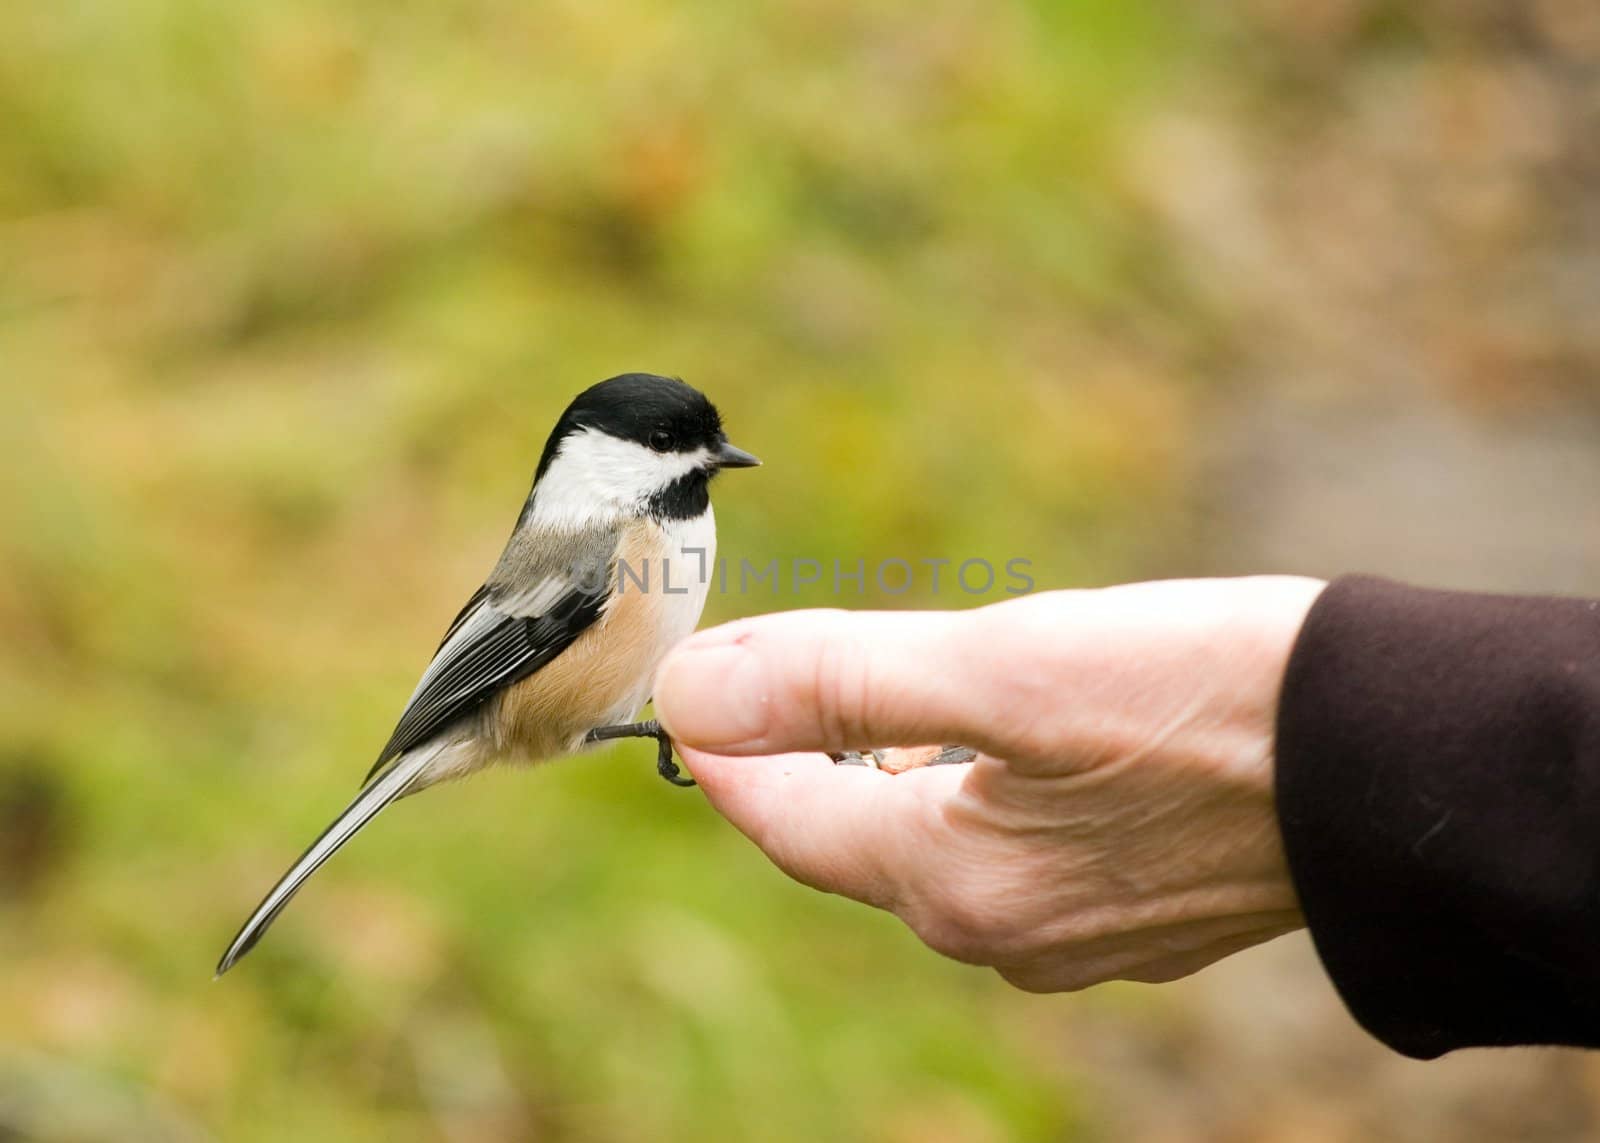 A Chickadee perched on a woman's hand eating bird seed.